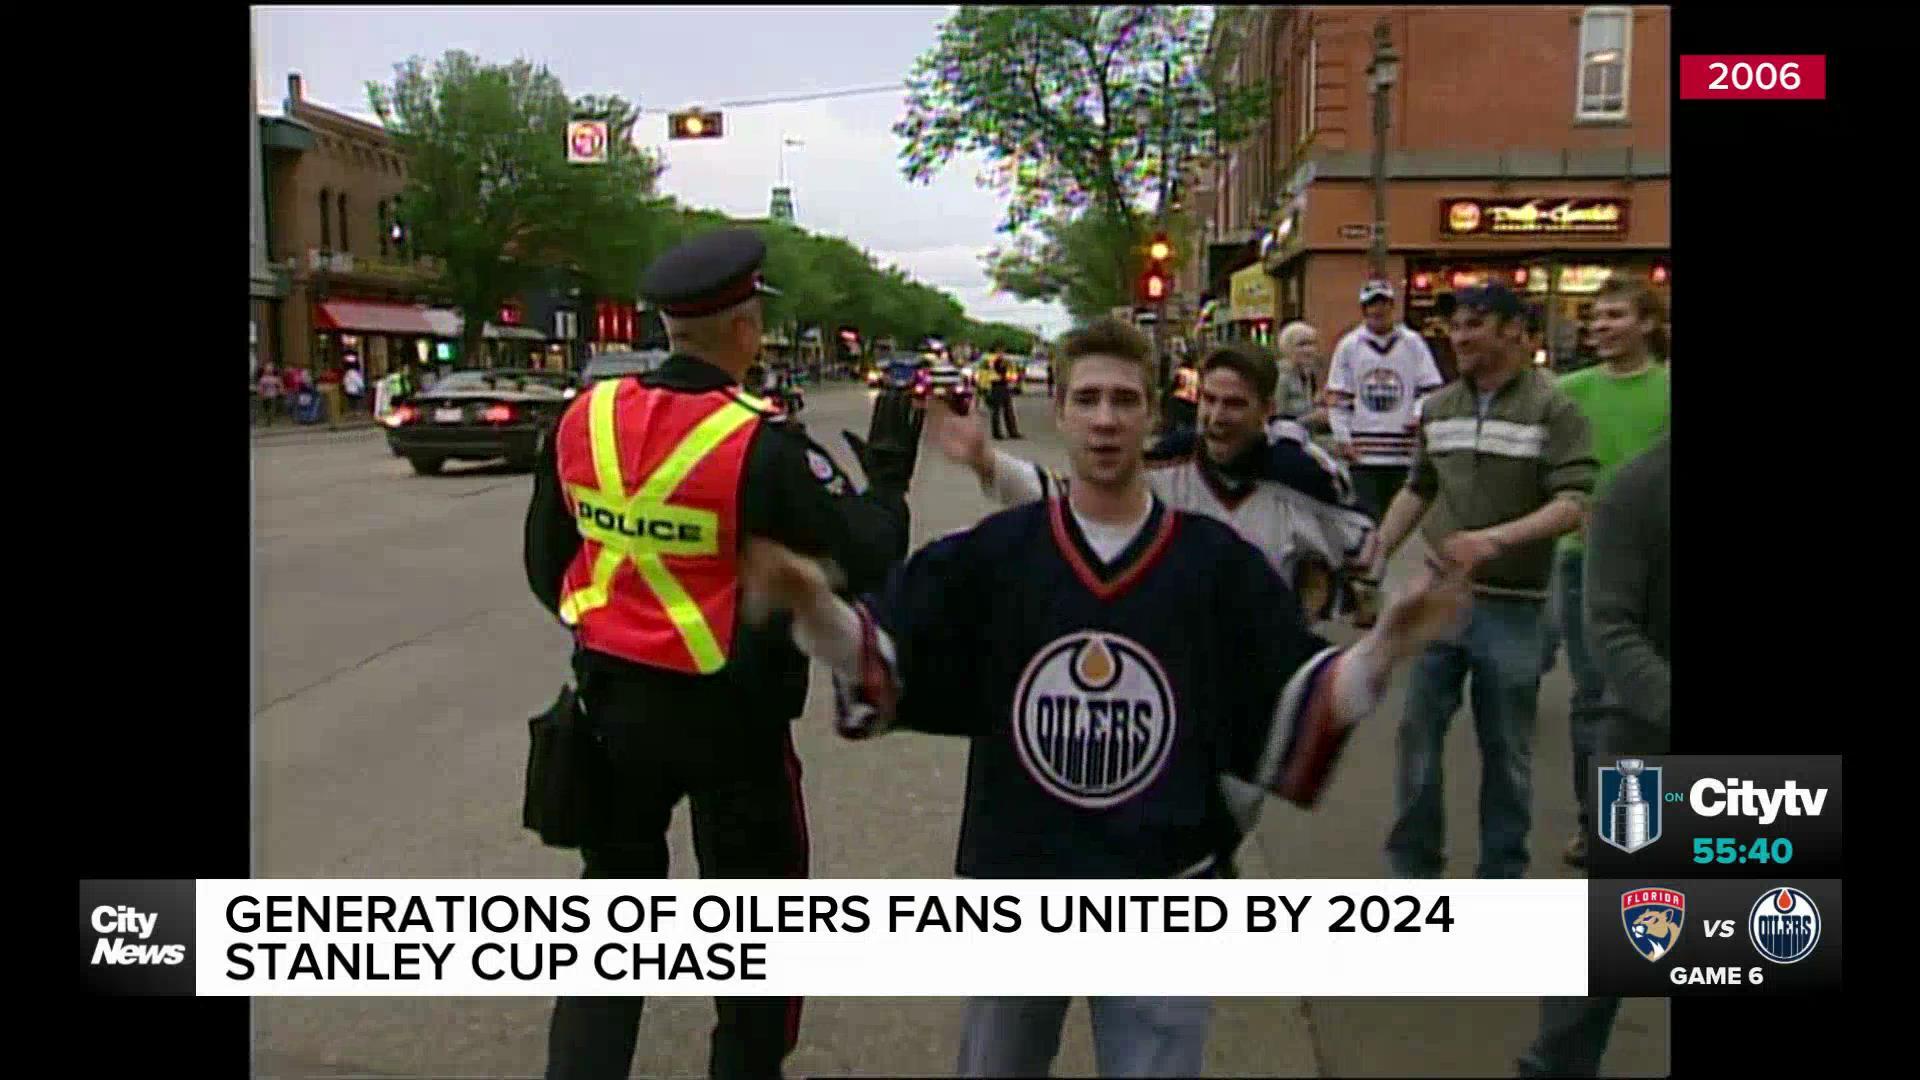 Generations of Oilers united by this year’s Stanley Cup chase